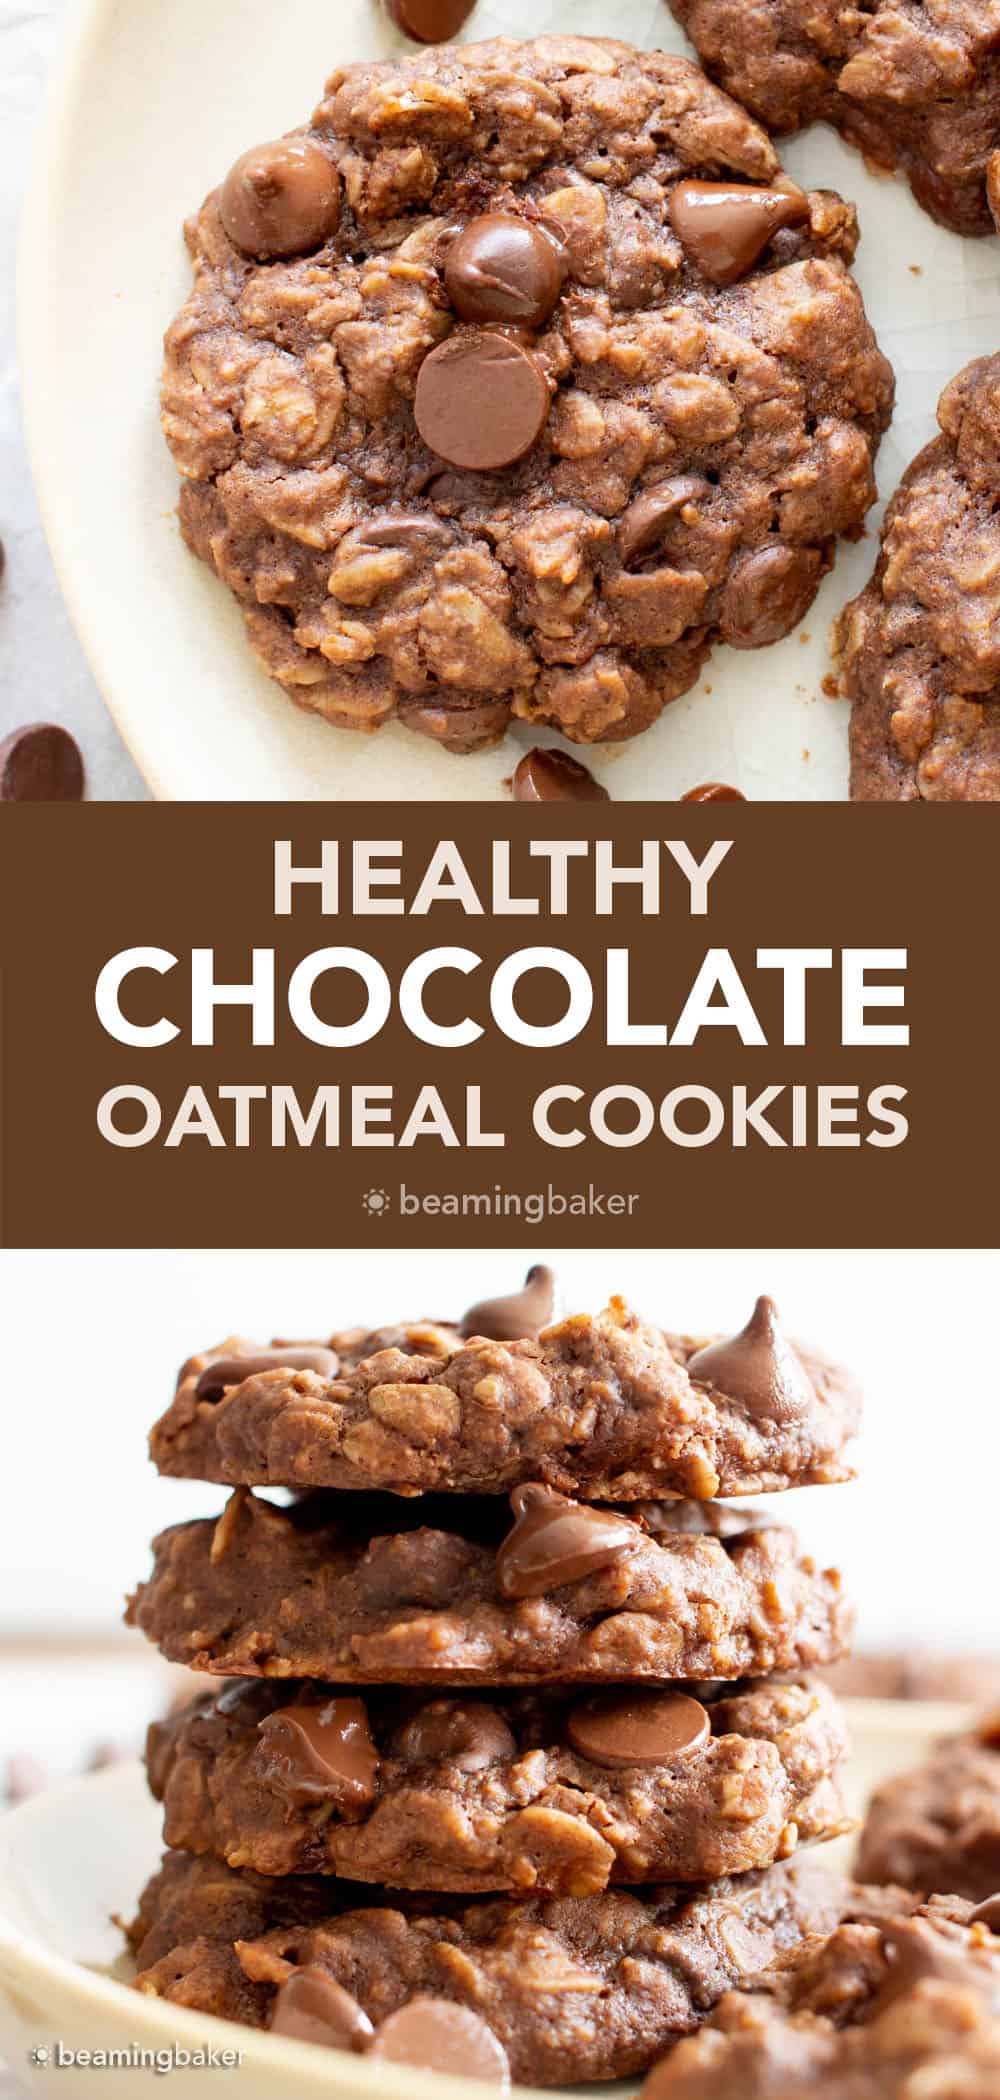 Healthy Chocolate Oatmeal Cookies: the best healthy chocolate oatmeal cookies—chewy & delicious, packed with chocolate chips & made with healthy ingredients. #Healthy #Oatmeal #Cookies #Chocolate | Recipe at BeamingBaker.com